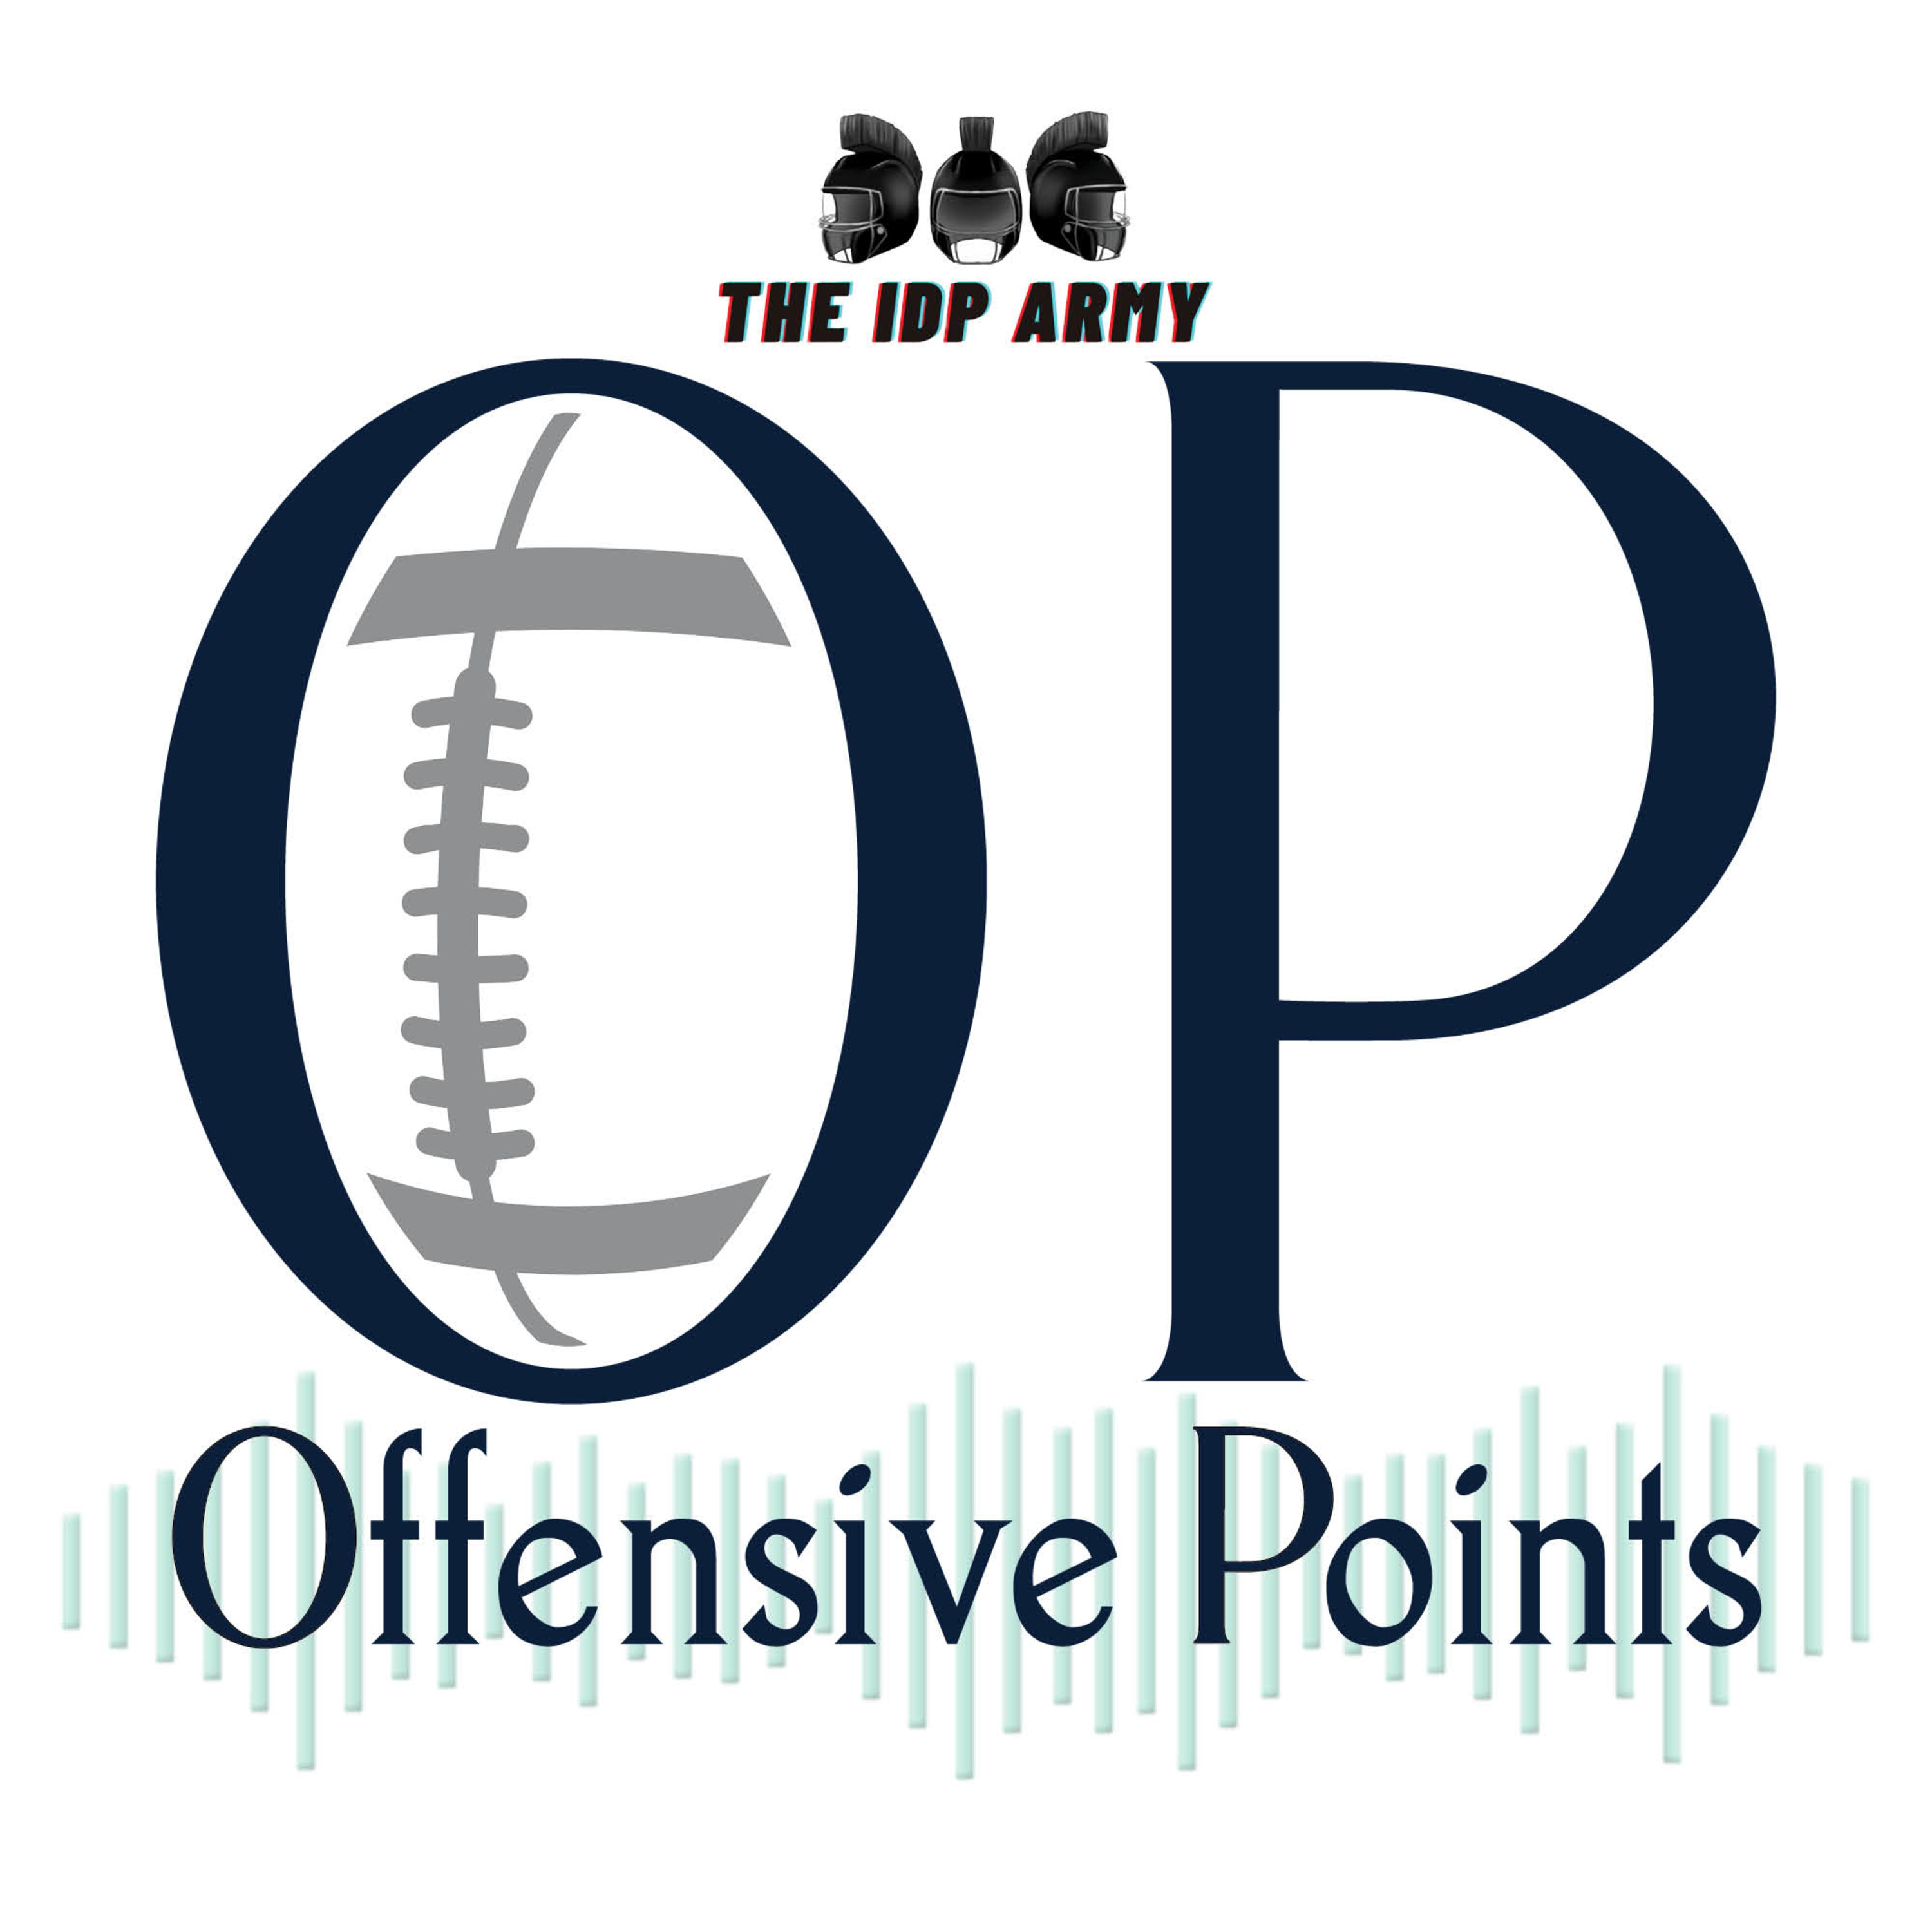 Offensive Points: Defensive Points